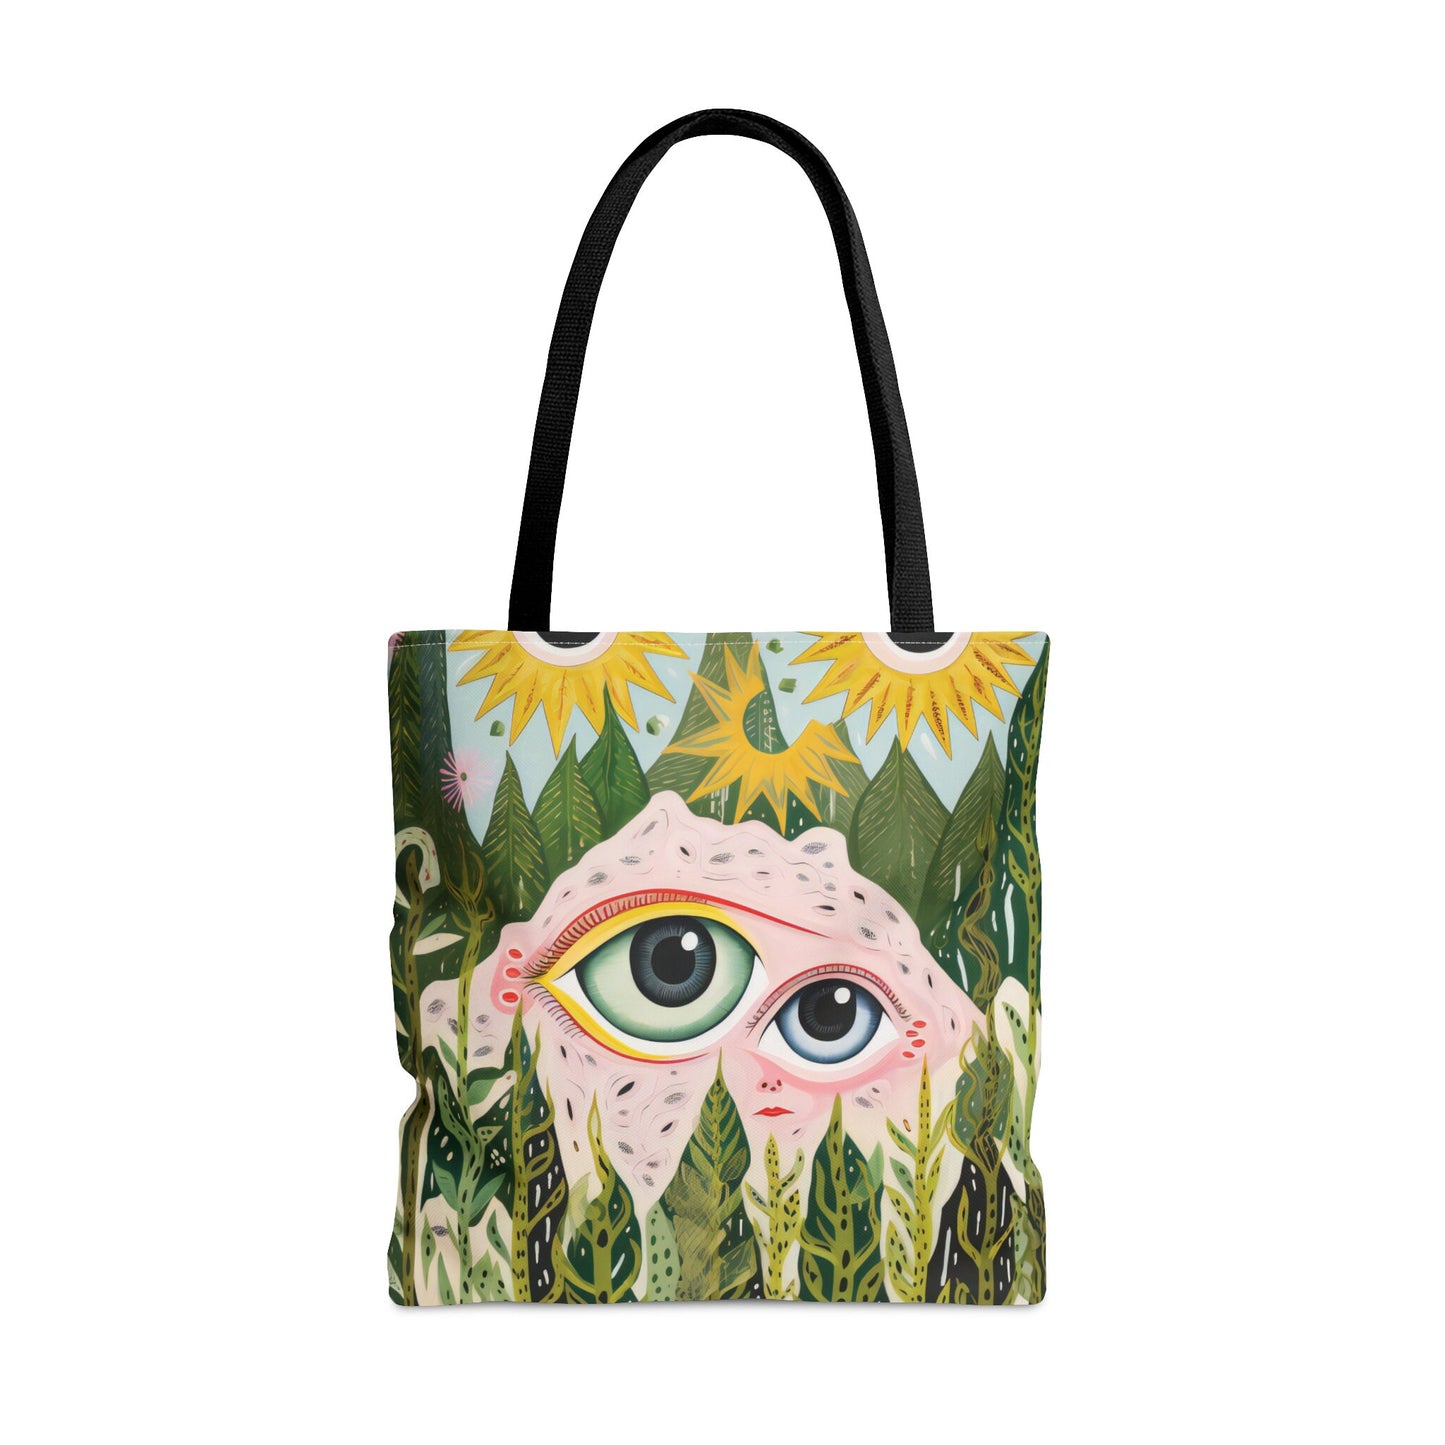 Magic Eyes Tote Bag • Printed Shopping Bag • Funny Tote Bag • Grocery Bag • Christmas Gift • Gift For Her • Cotton Bag • Perfect for Travel